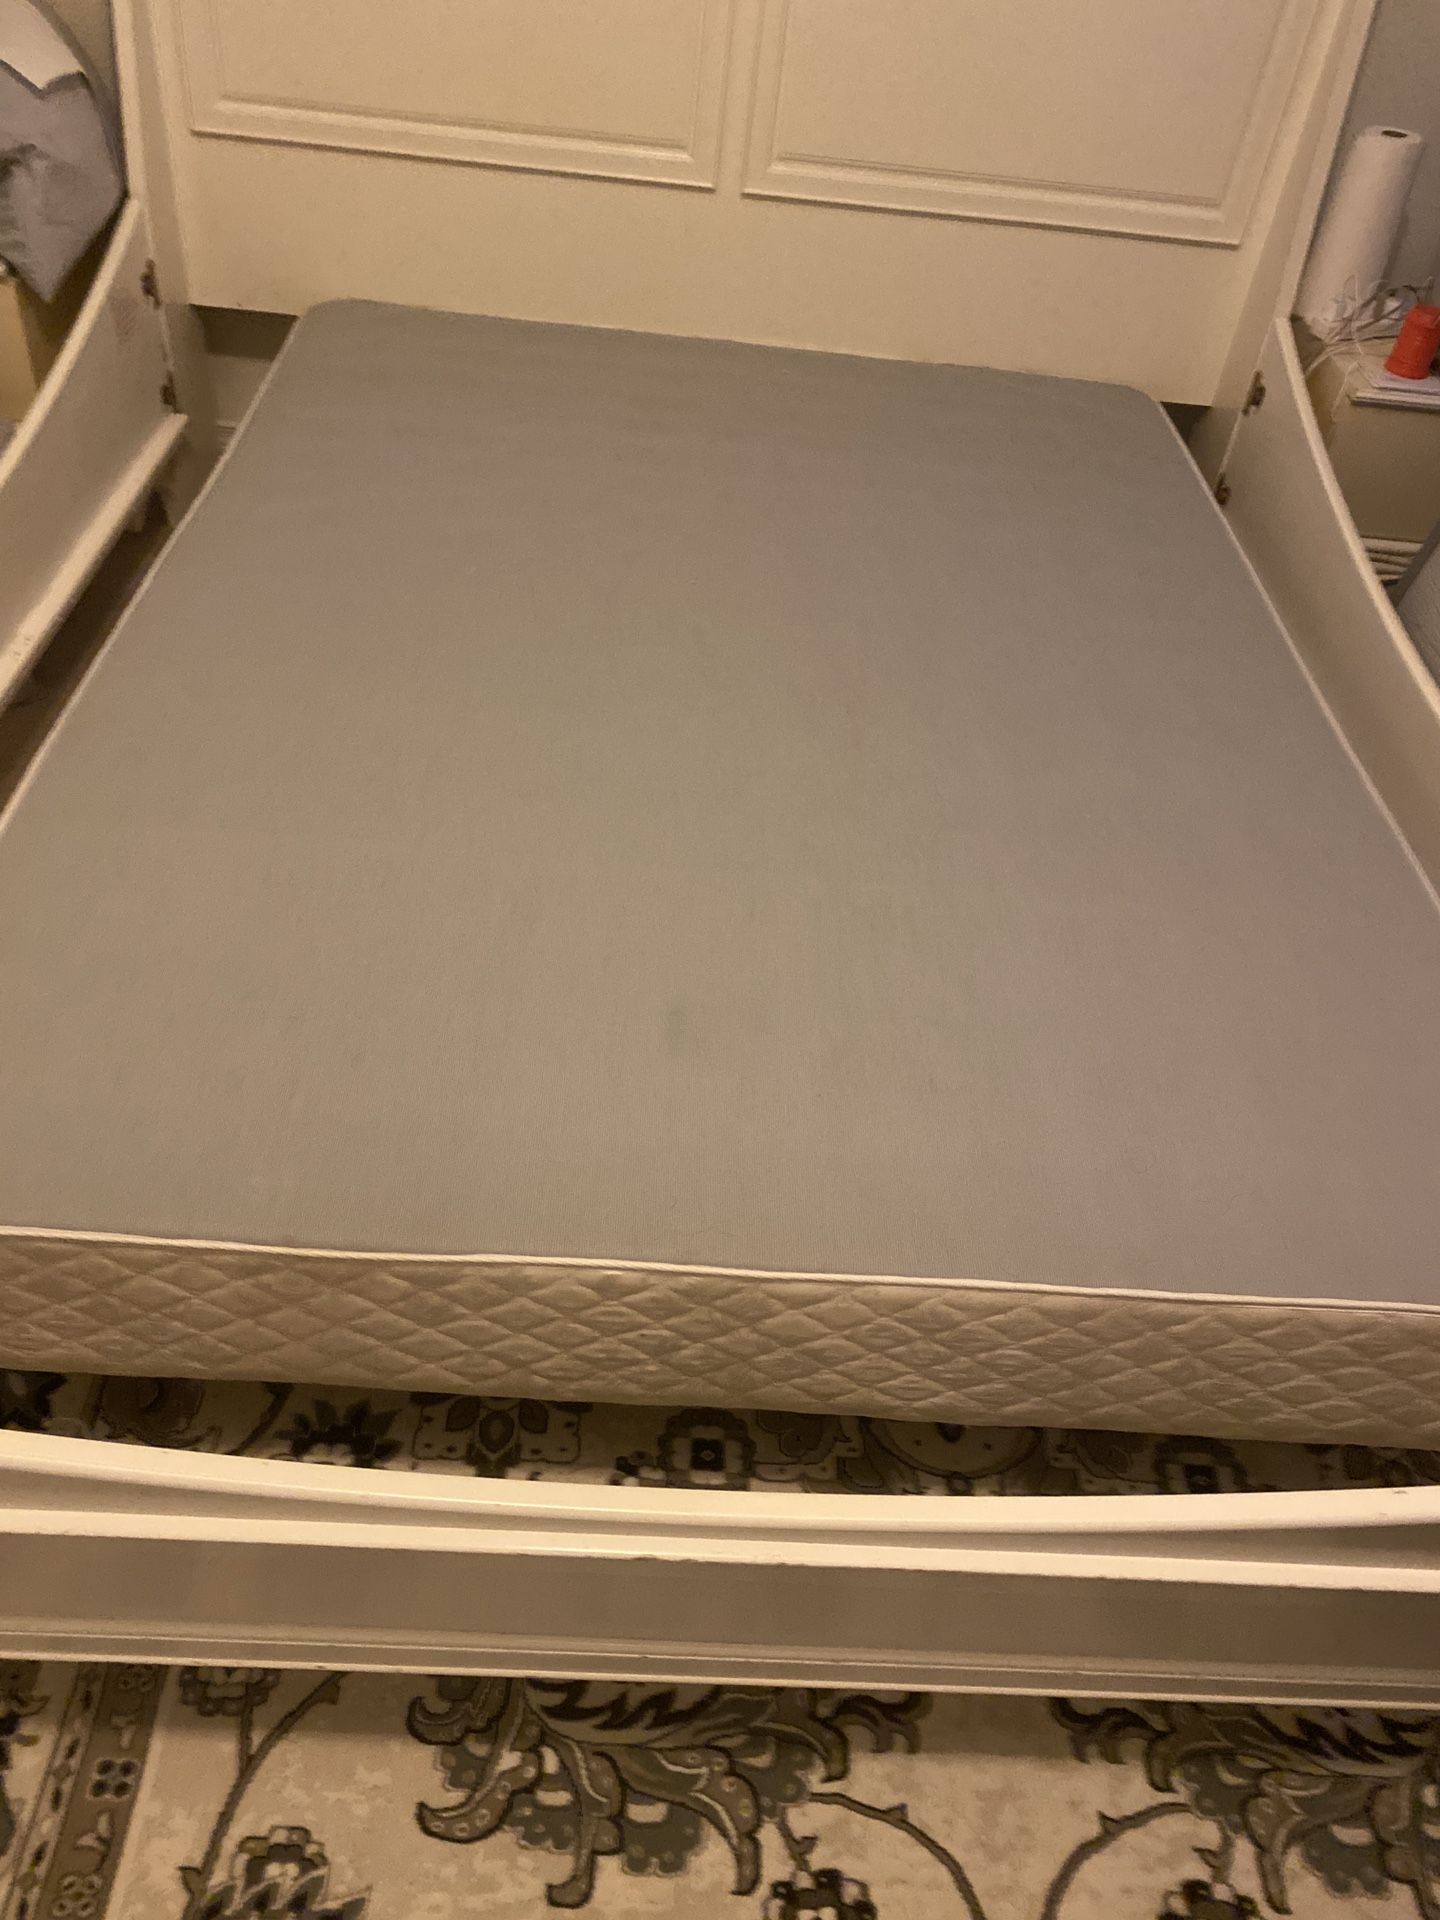 King Mattress And Box springs And Frame 